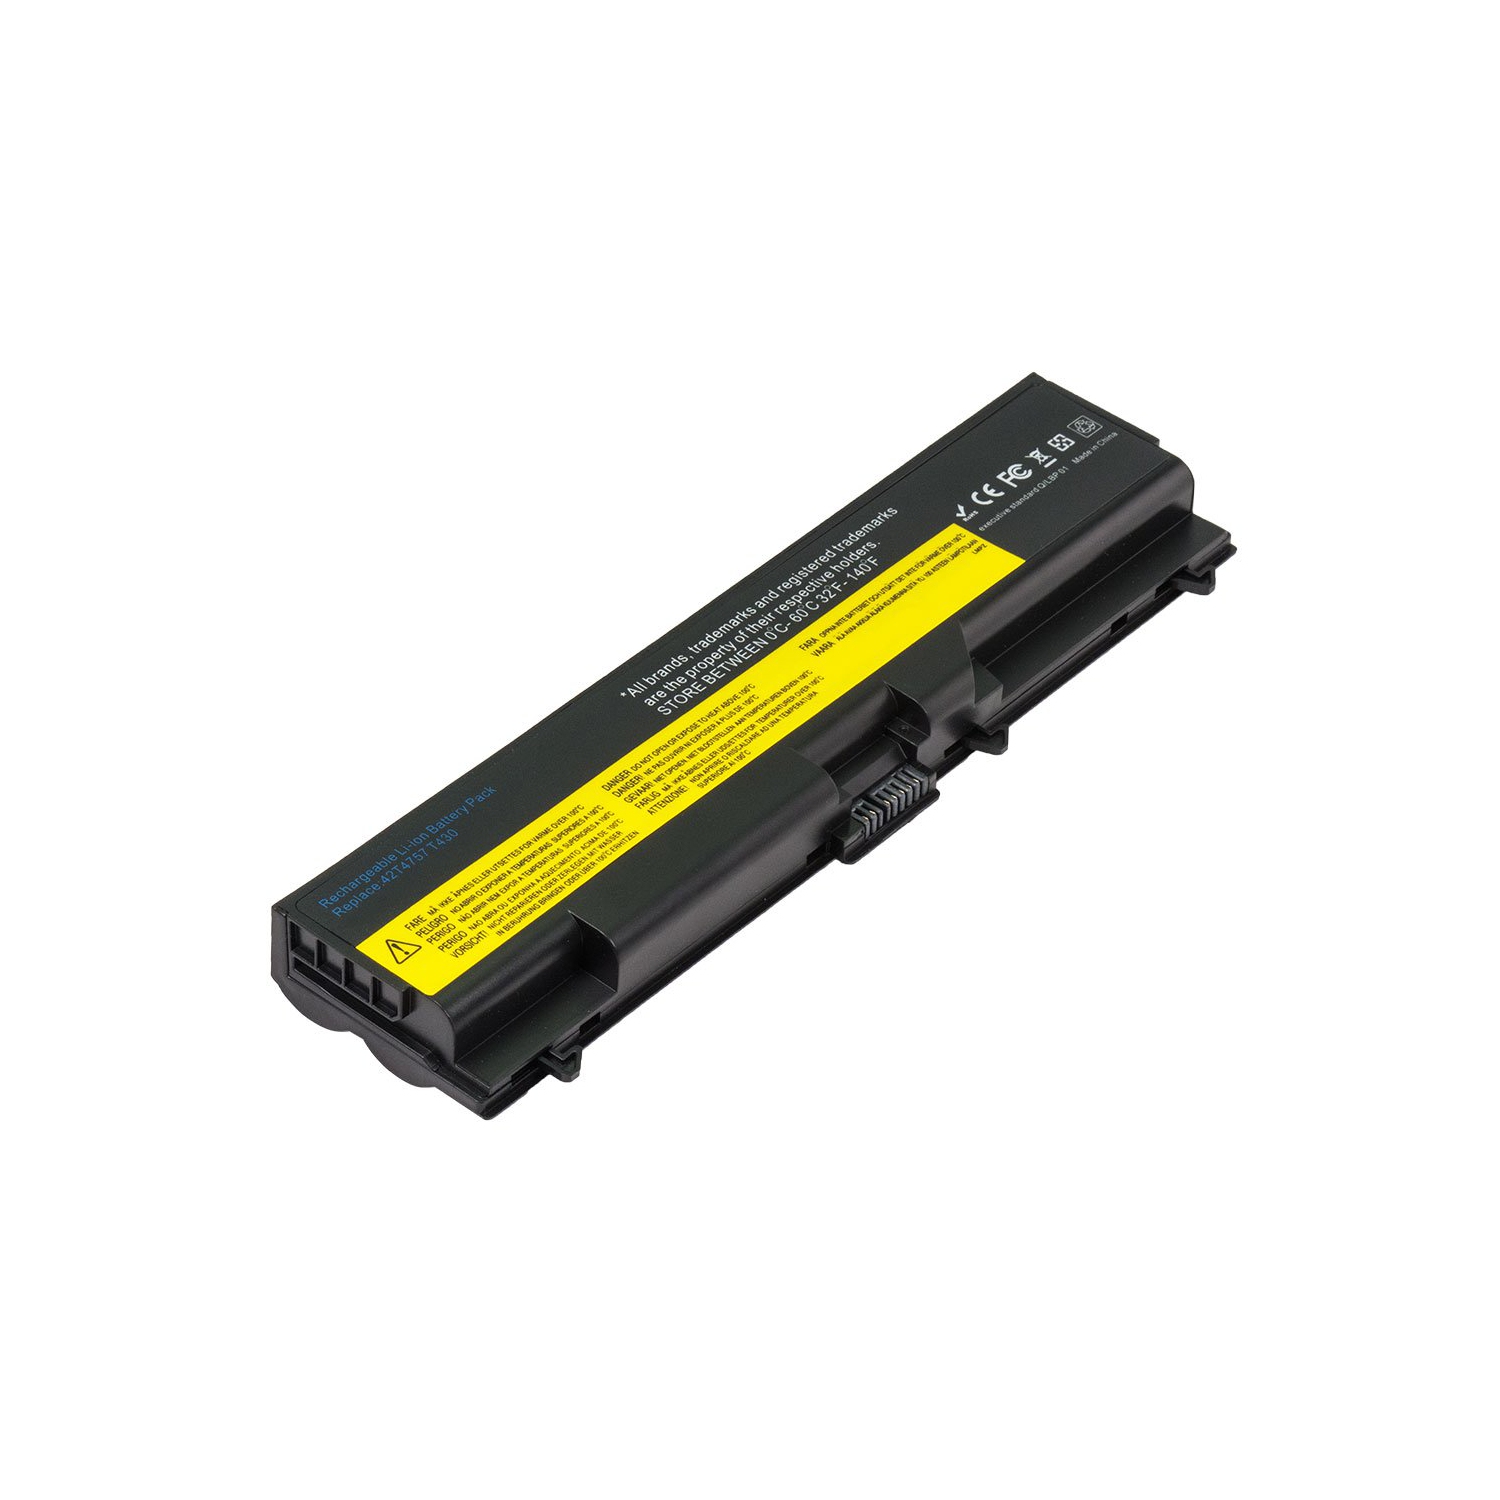 Laptop Battery Replacement for Lenovo ThinkPad W530 2463, 42T4712, 42T4737, 42T4763, 42T4797, 42T4921, 0A36303